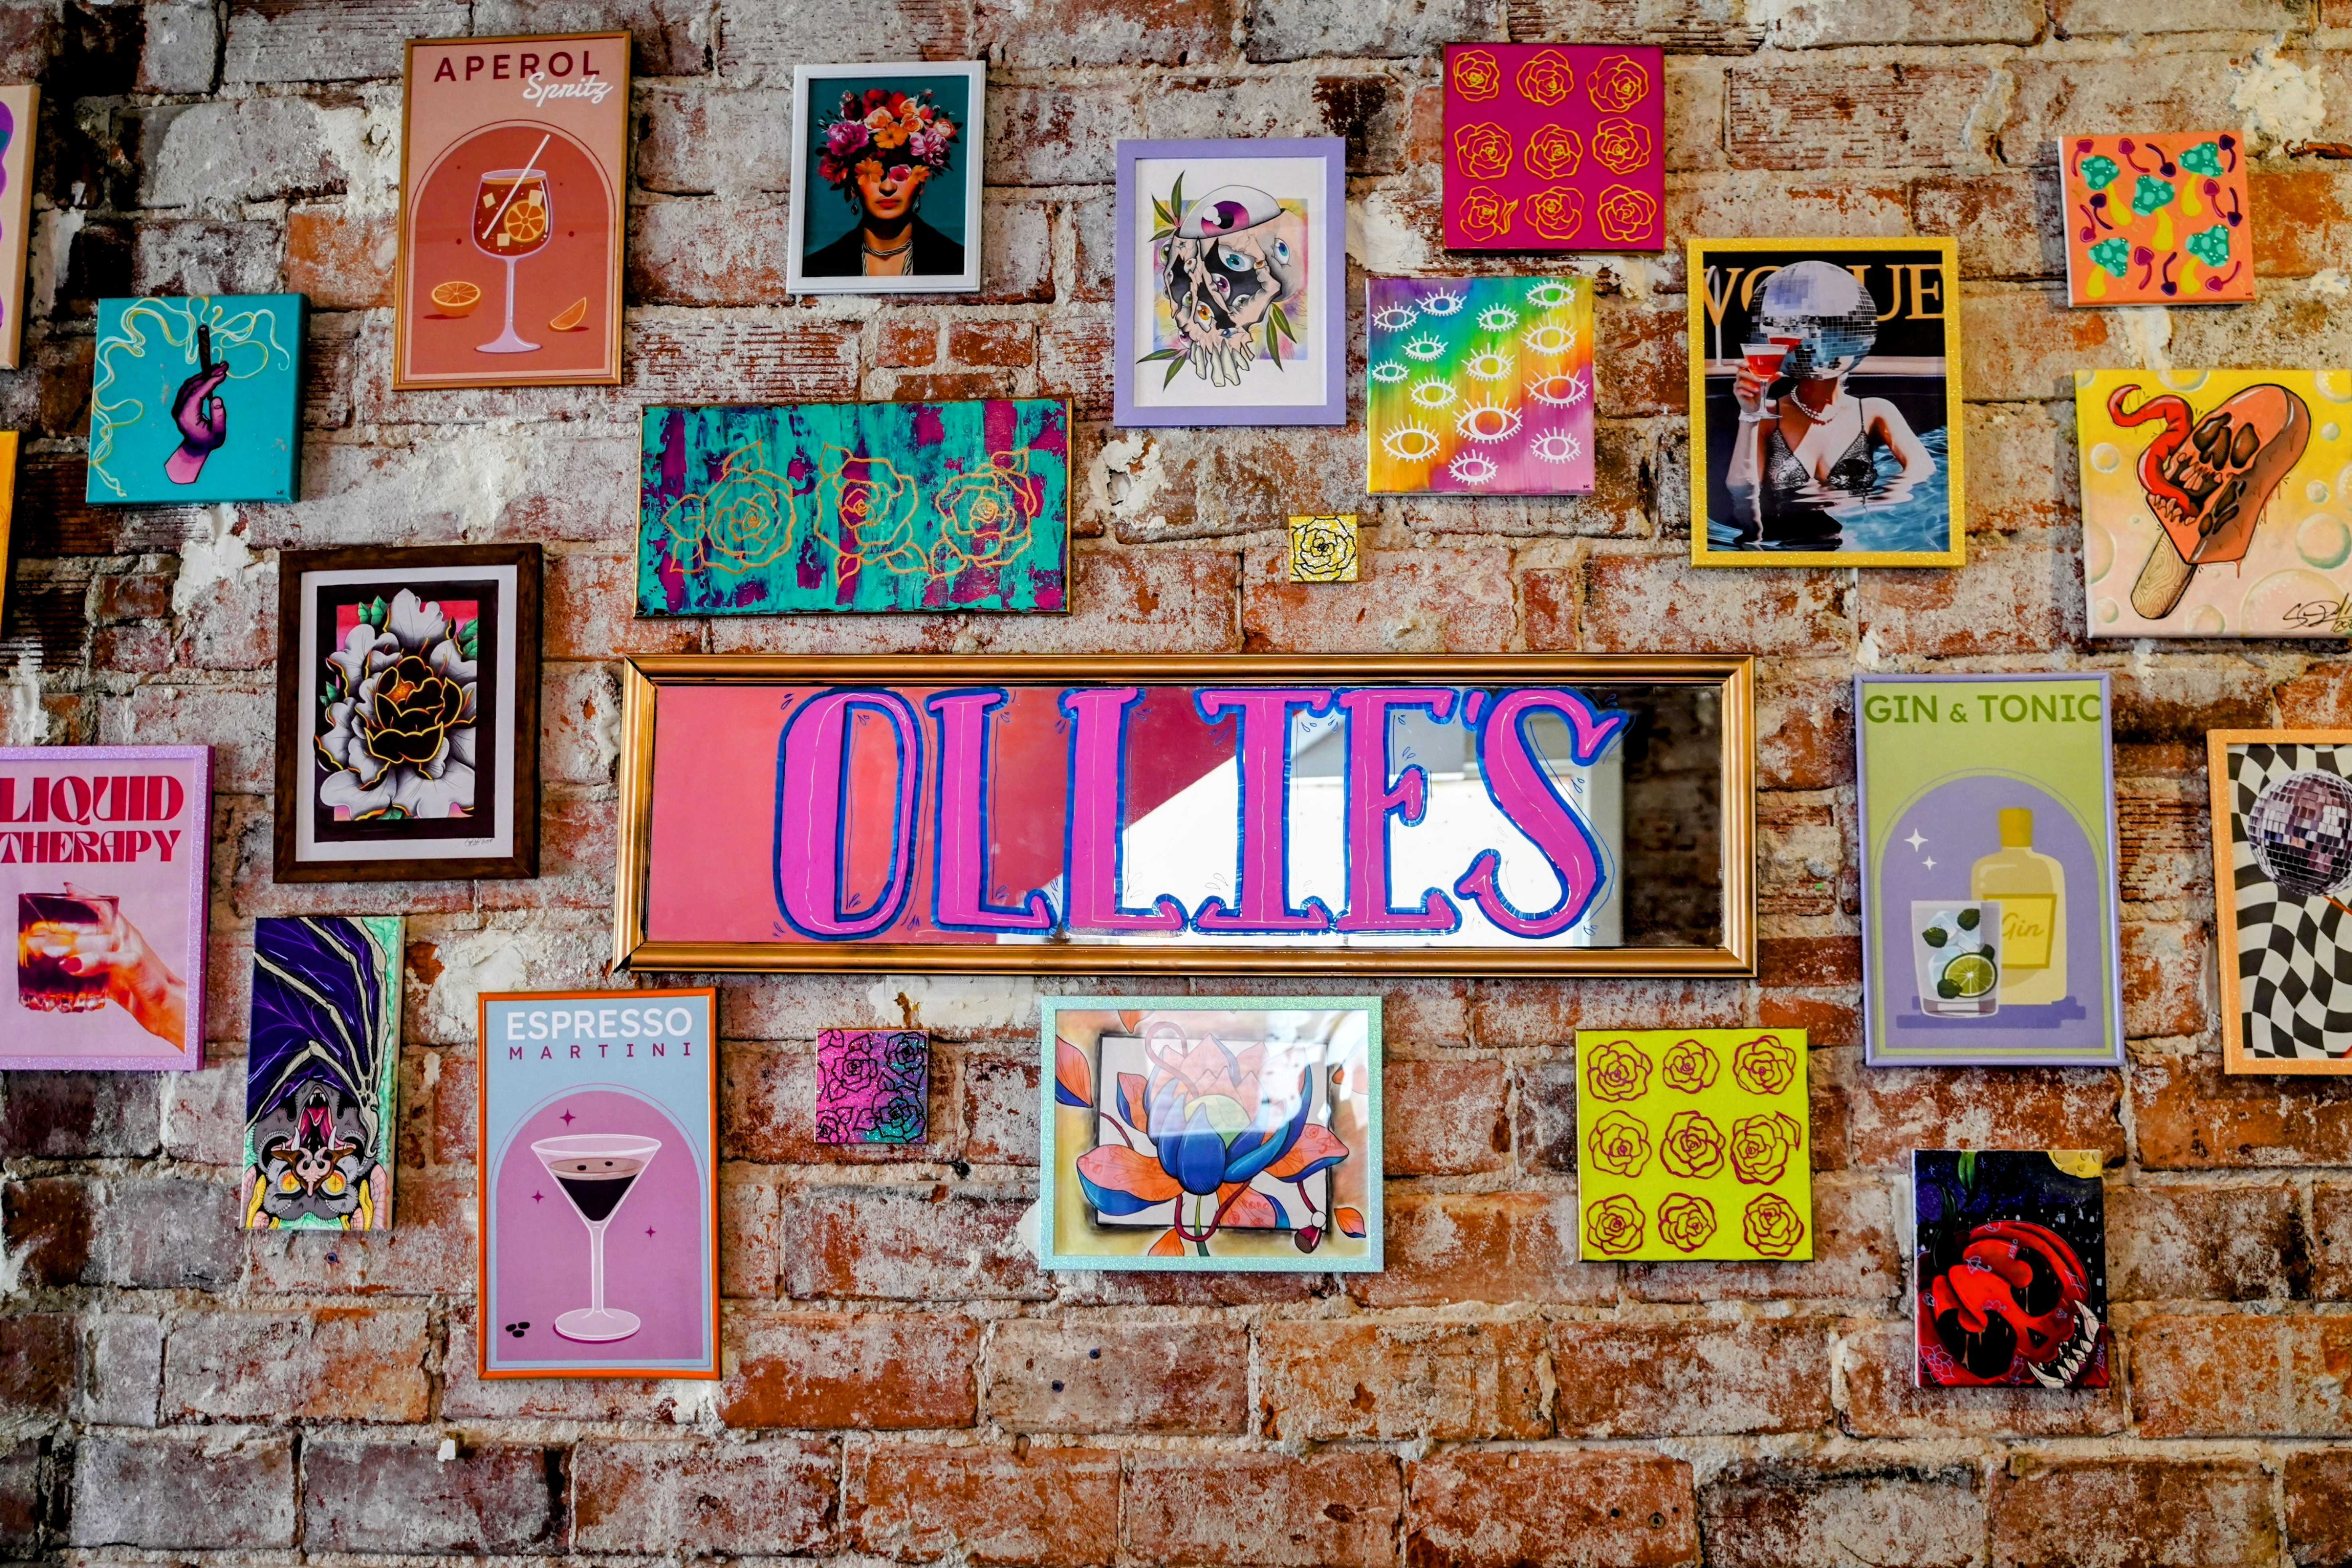 Ollie's Sake Bar: Where Good Times and Silly Aesthetics Collide